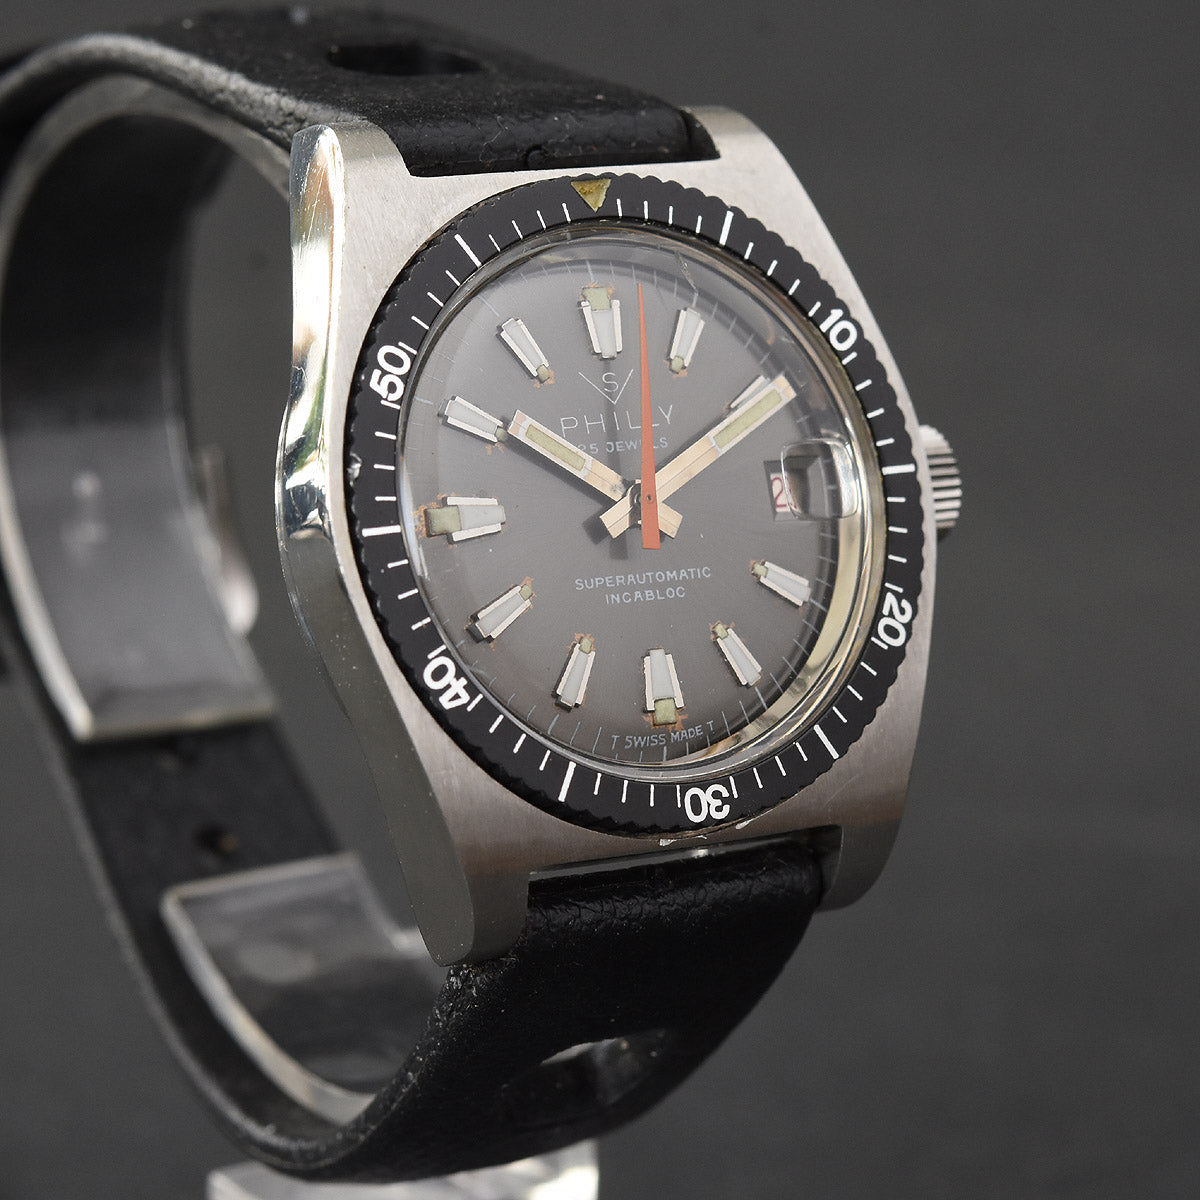 70s PHILLY Superautomatic 20ATM Vintage Swiss Diver Watch – empressissi